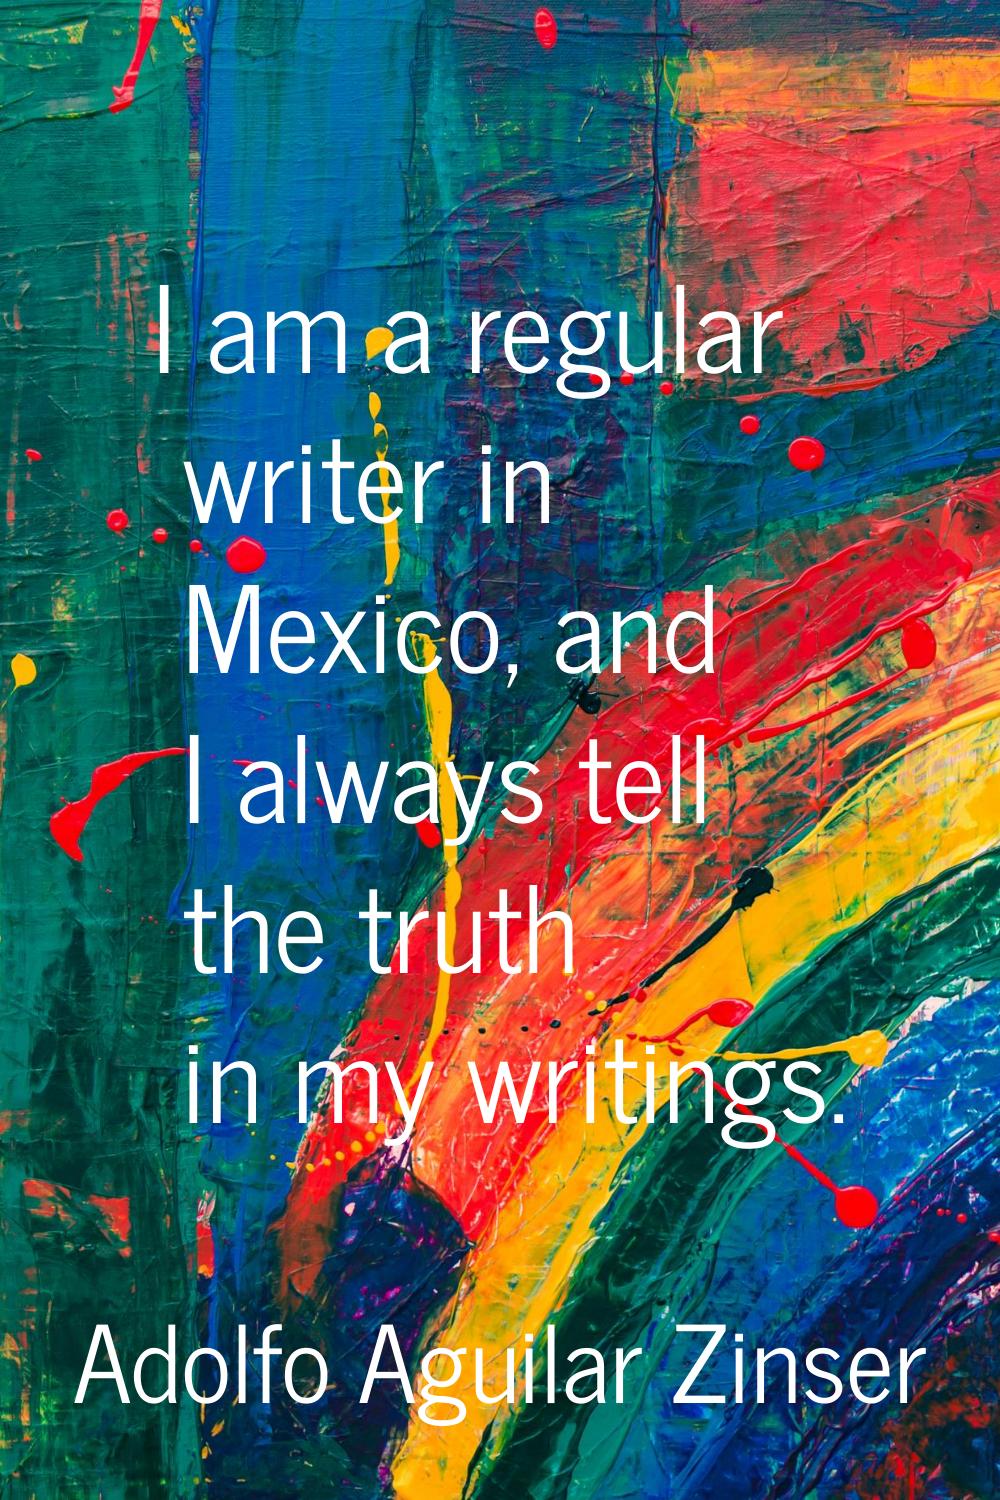 I am a regular writer in Mexico, and I always tell the truth in my writings.